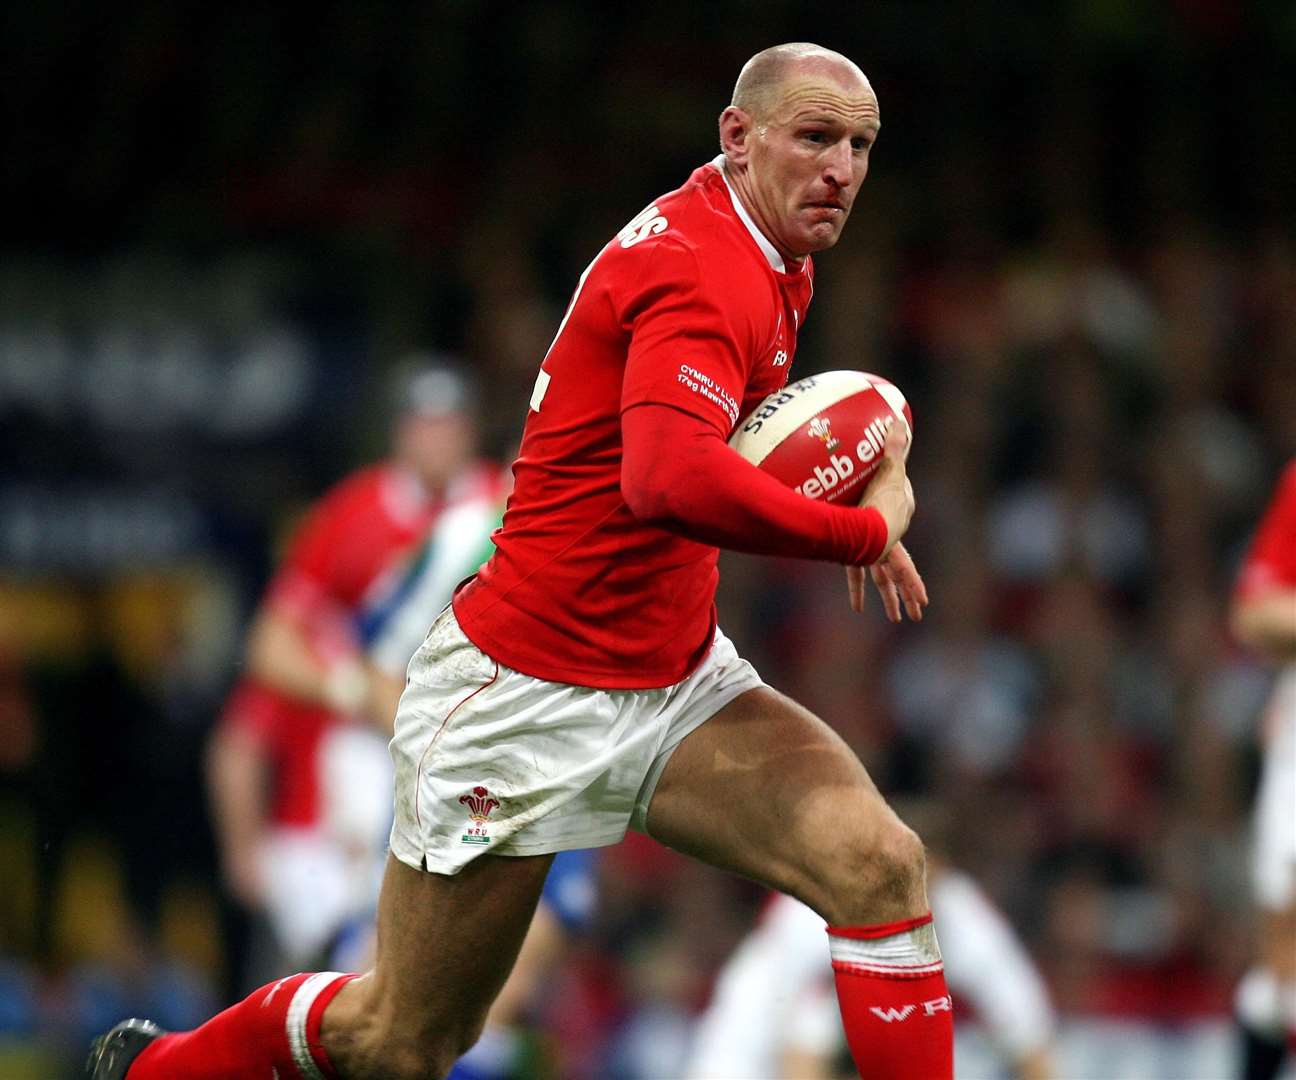 Mr Thomas playing in a Six Nations match at the Millennium Stadium, Cardiff during his career for Wales (PA)